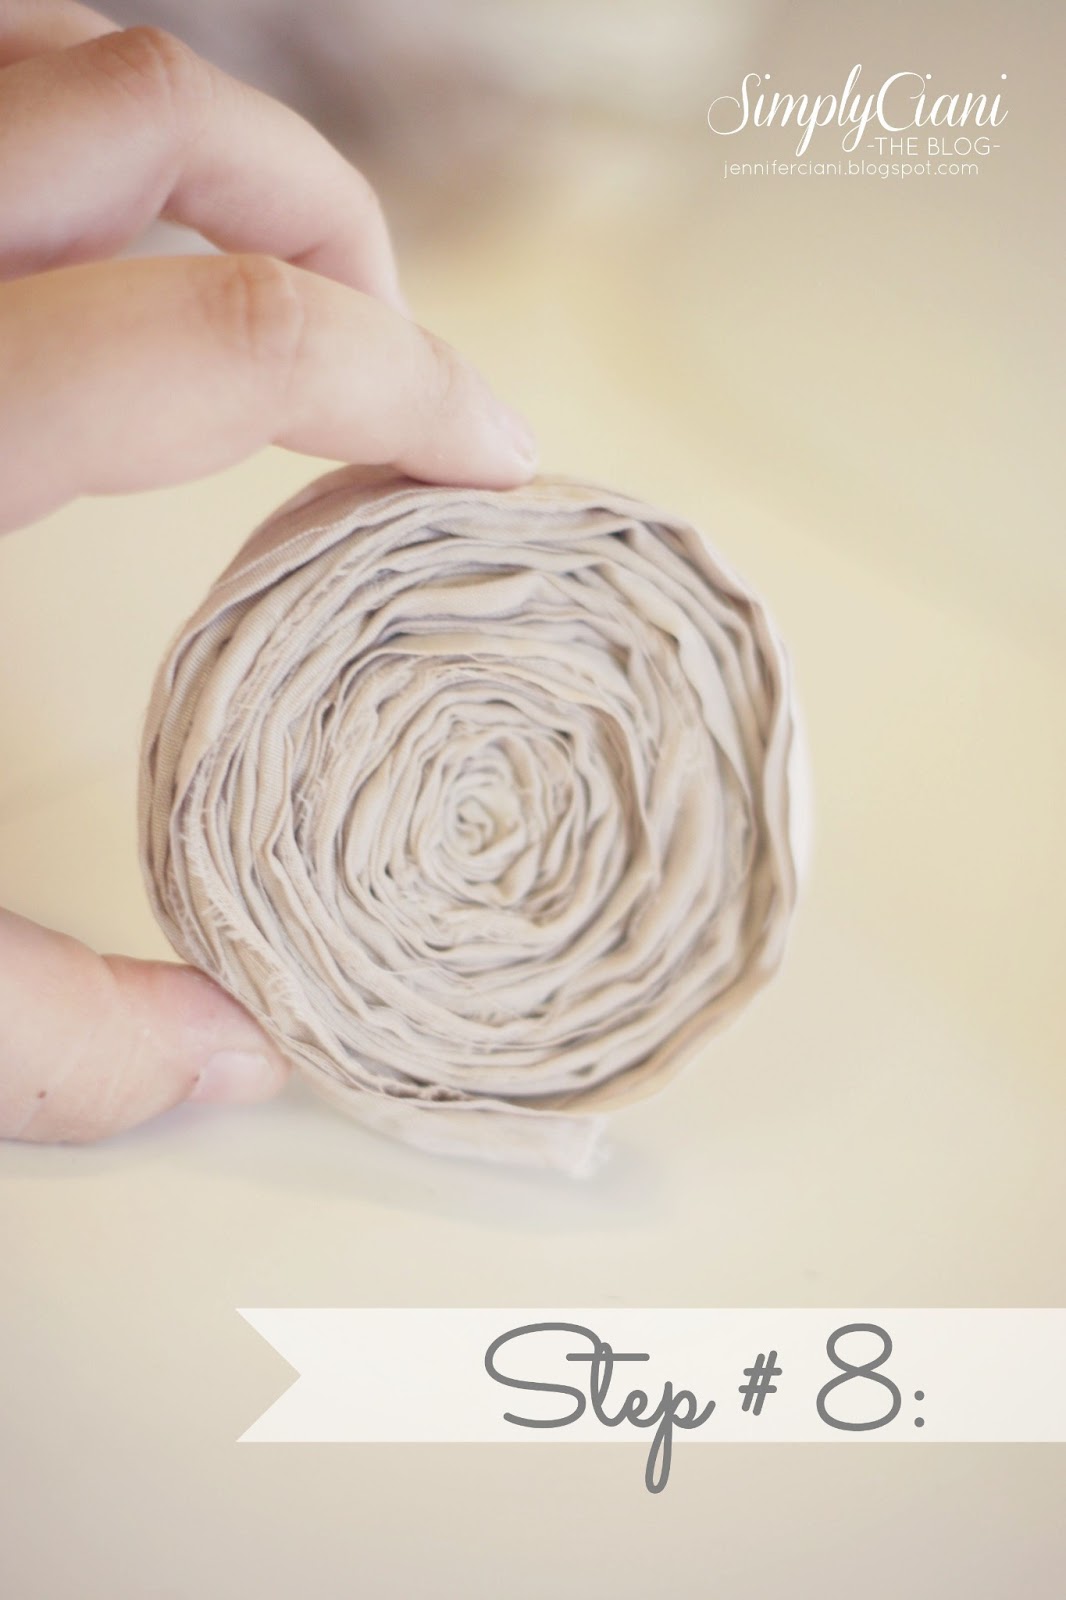 How to make a flower out of fabric